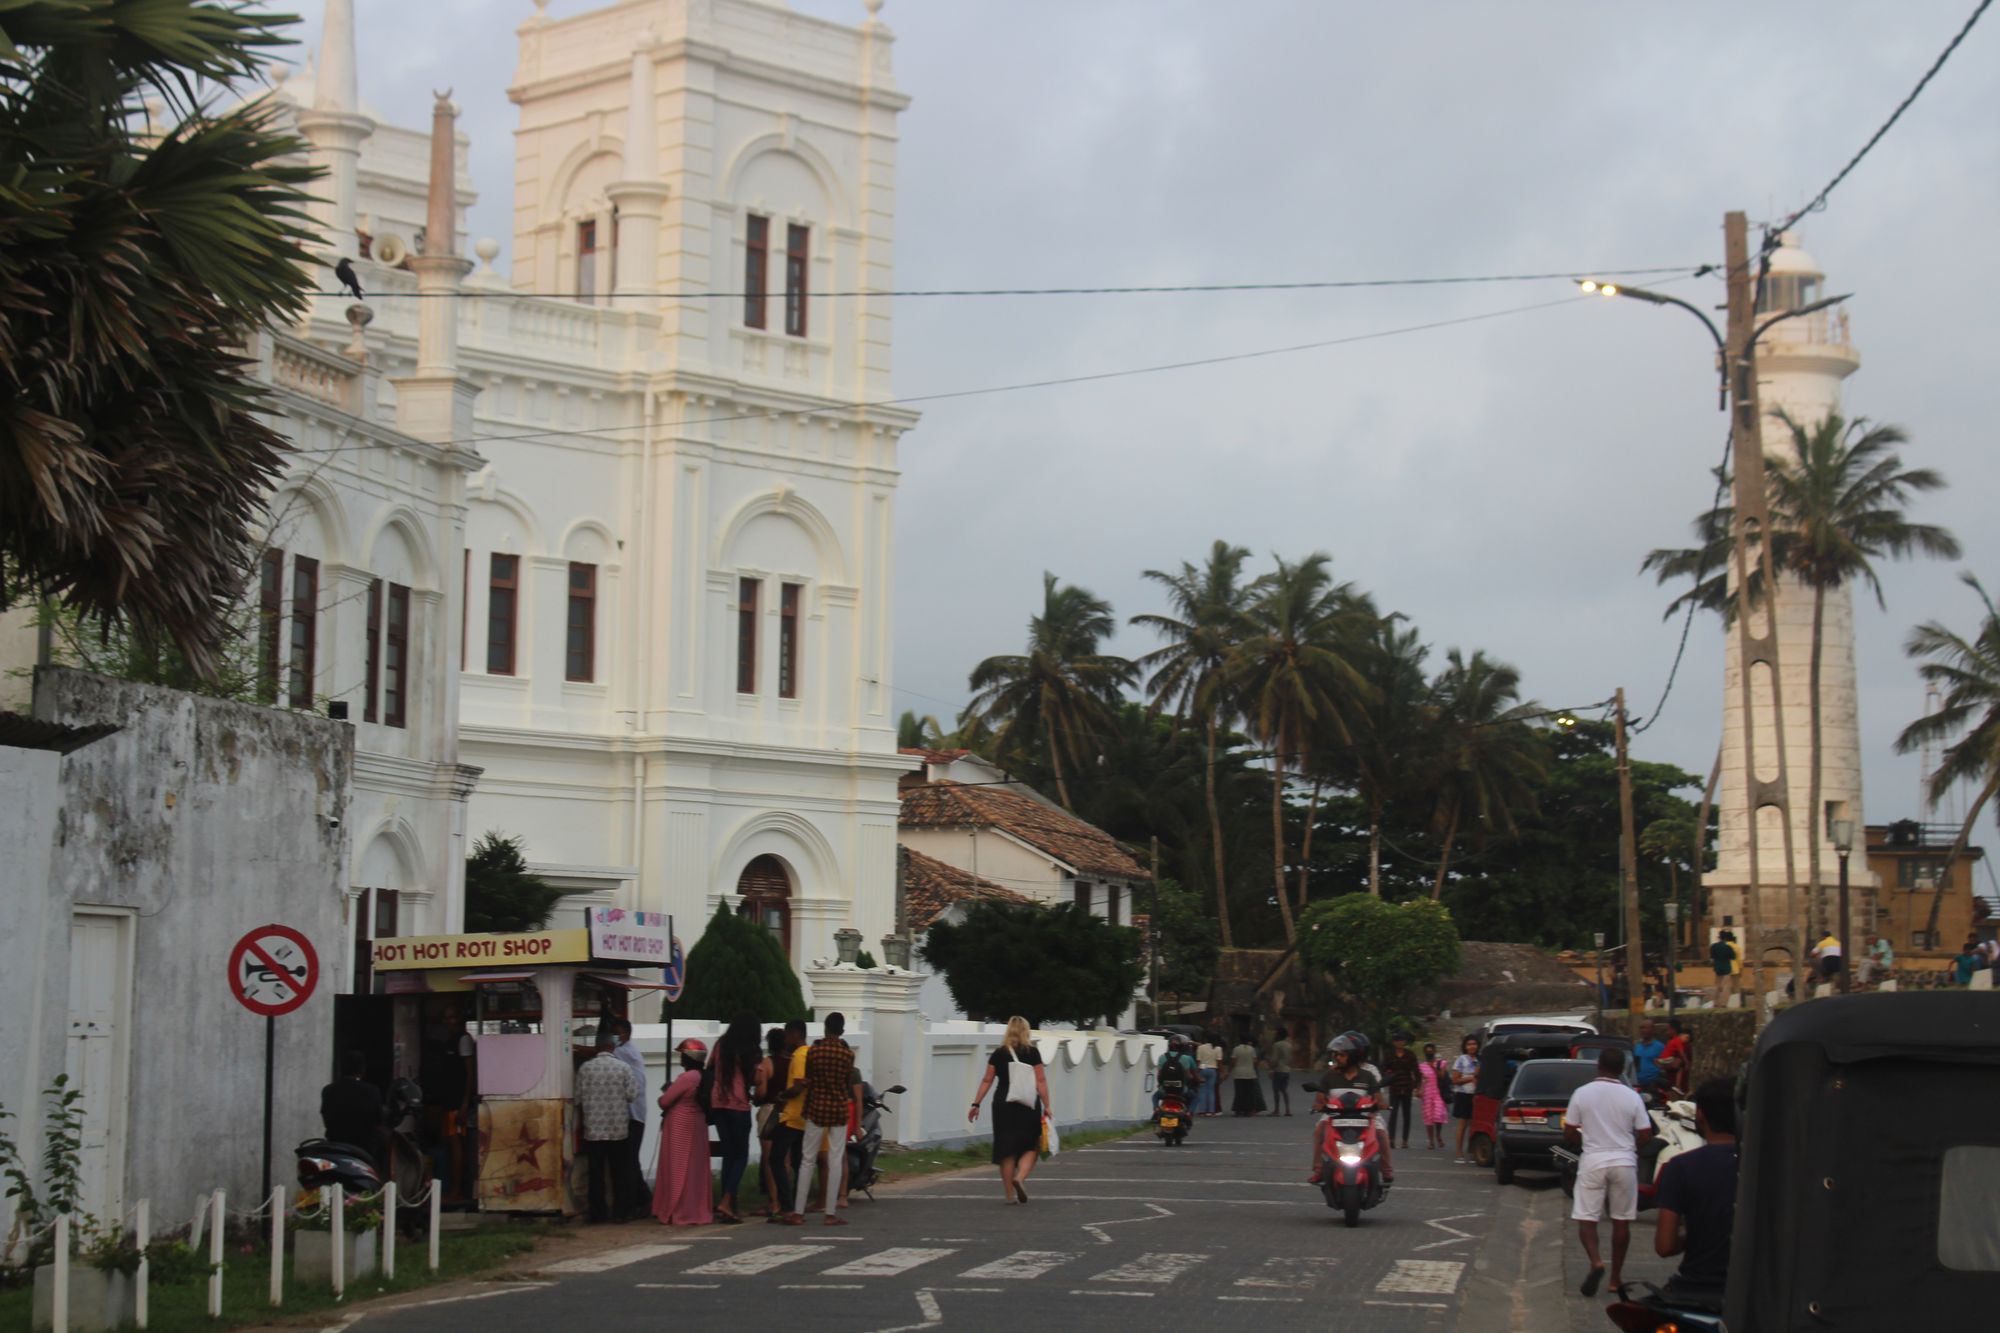 A street in Galle Fort, with people lined up near a street food vendor selling roti, with the Galle Fort lighthouse in the background.